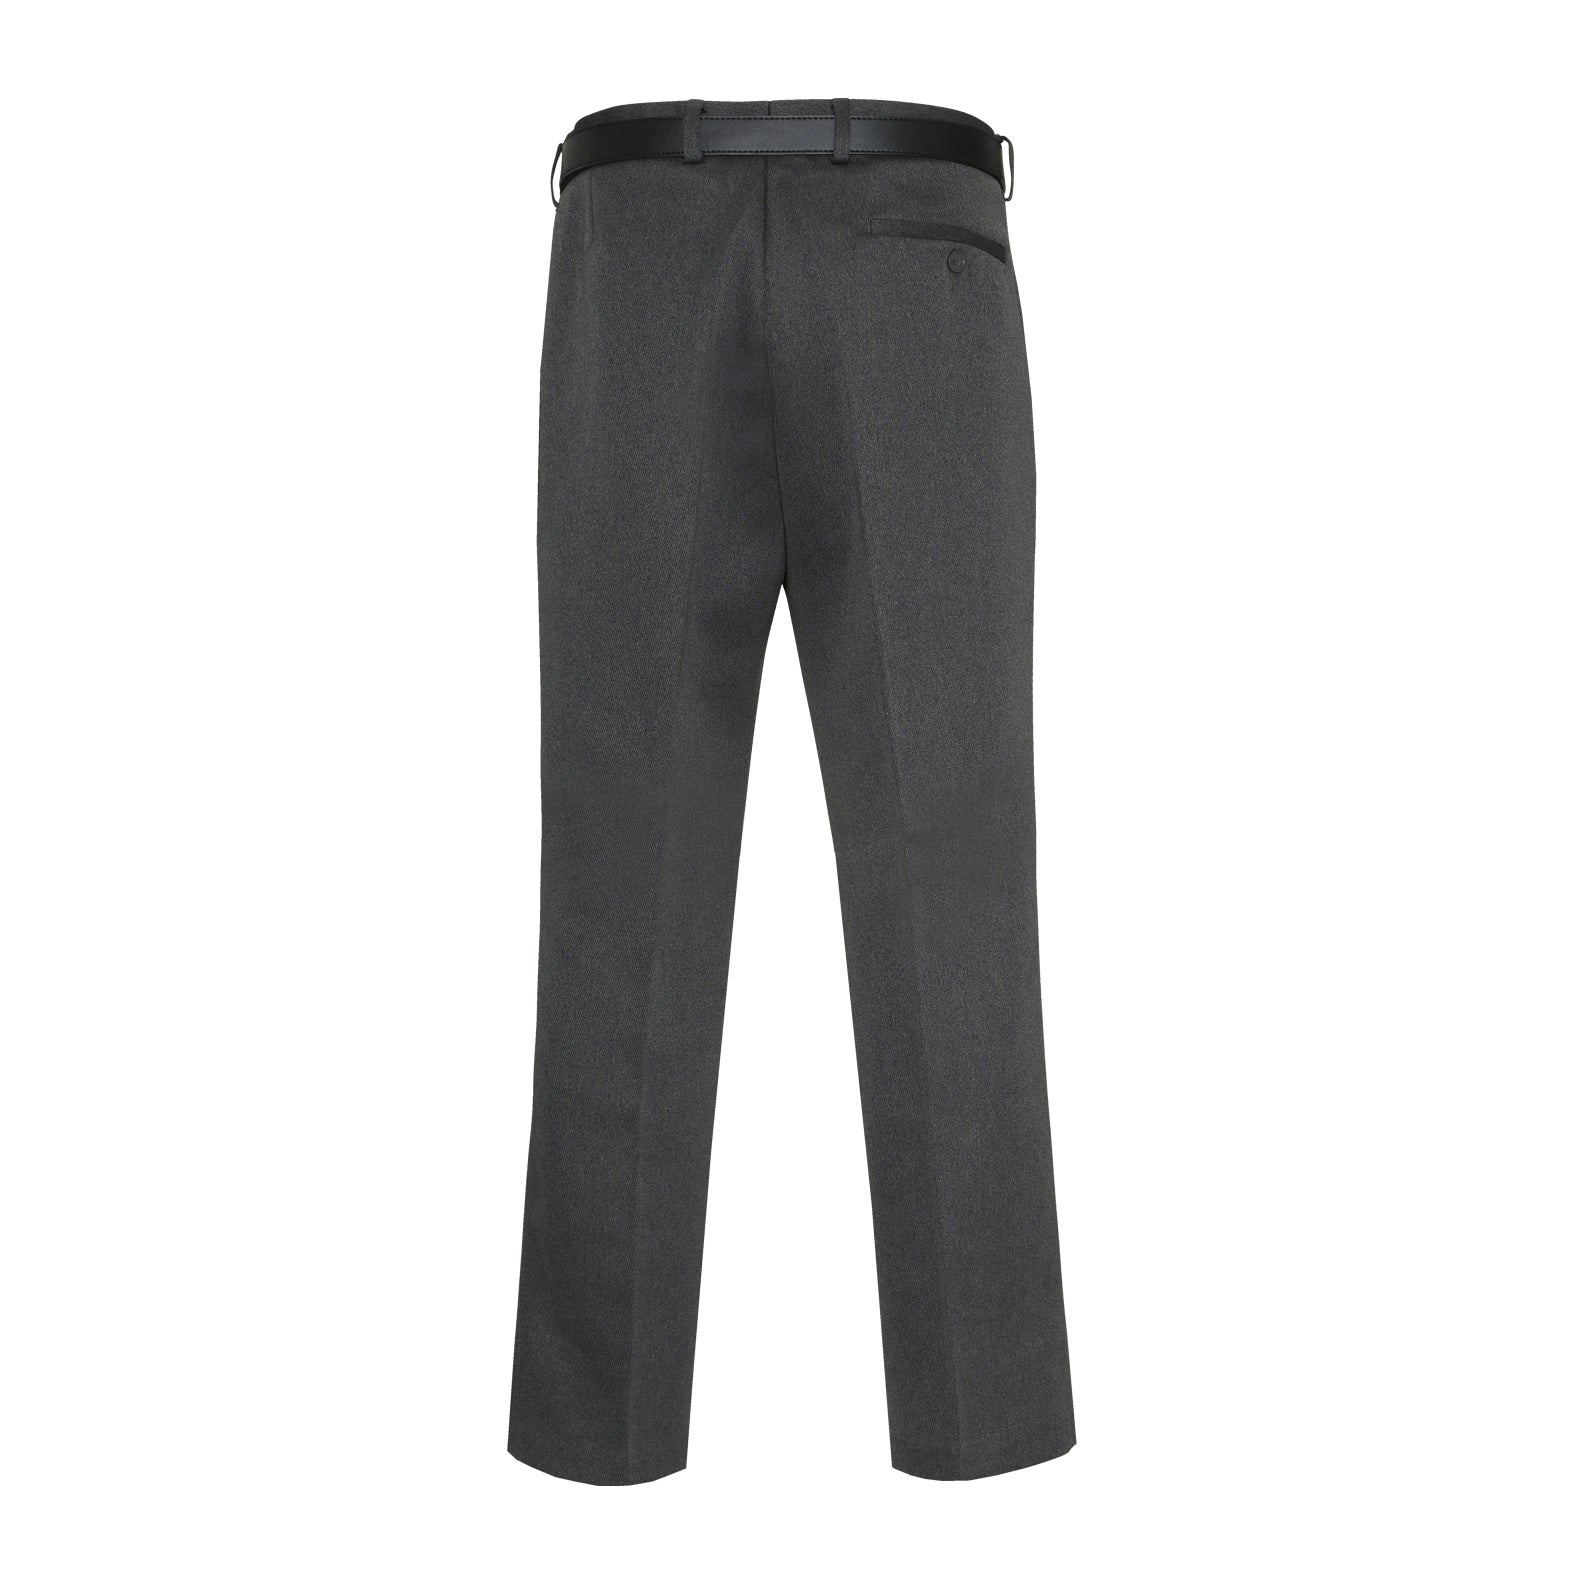 Cavalry Twill Trouser | Fantastic Quality, Smart Trousers From New